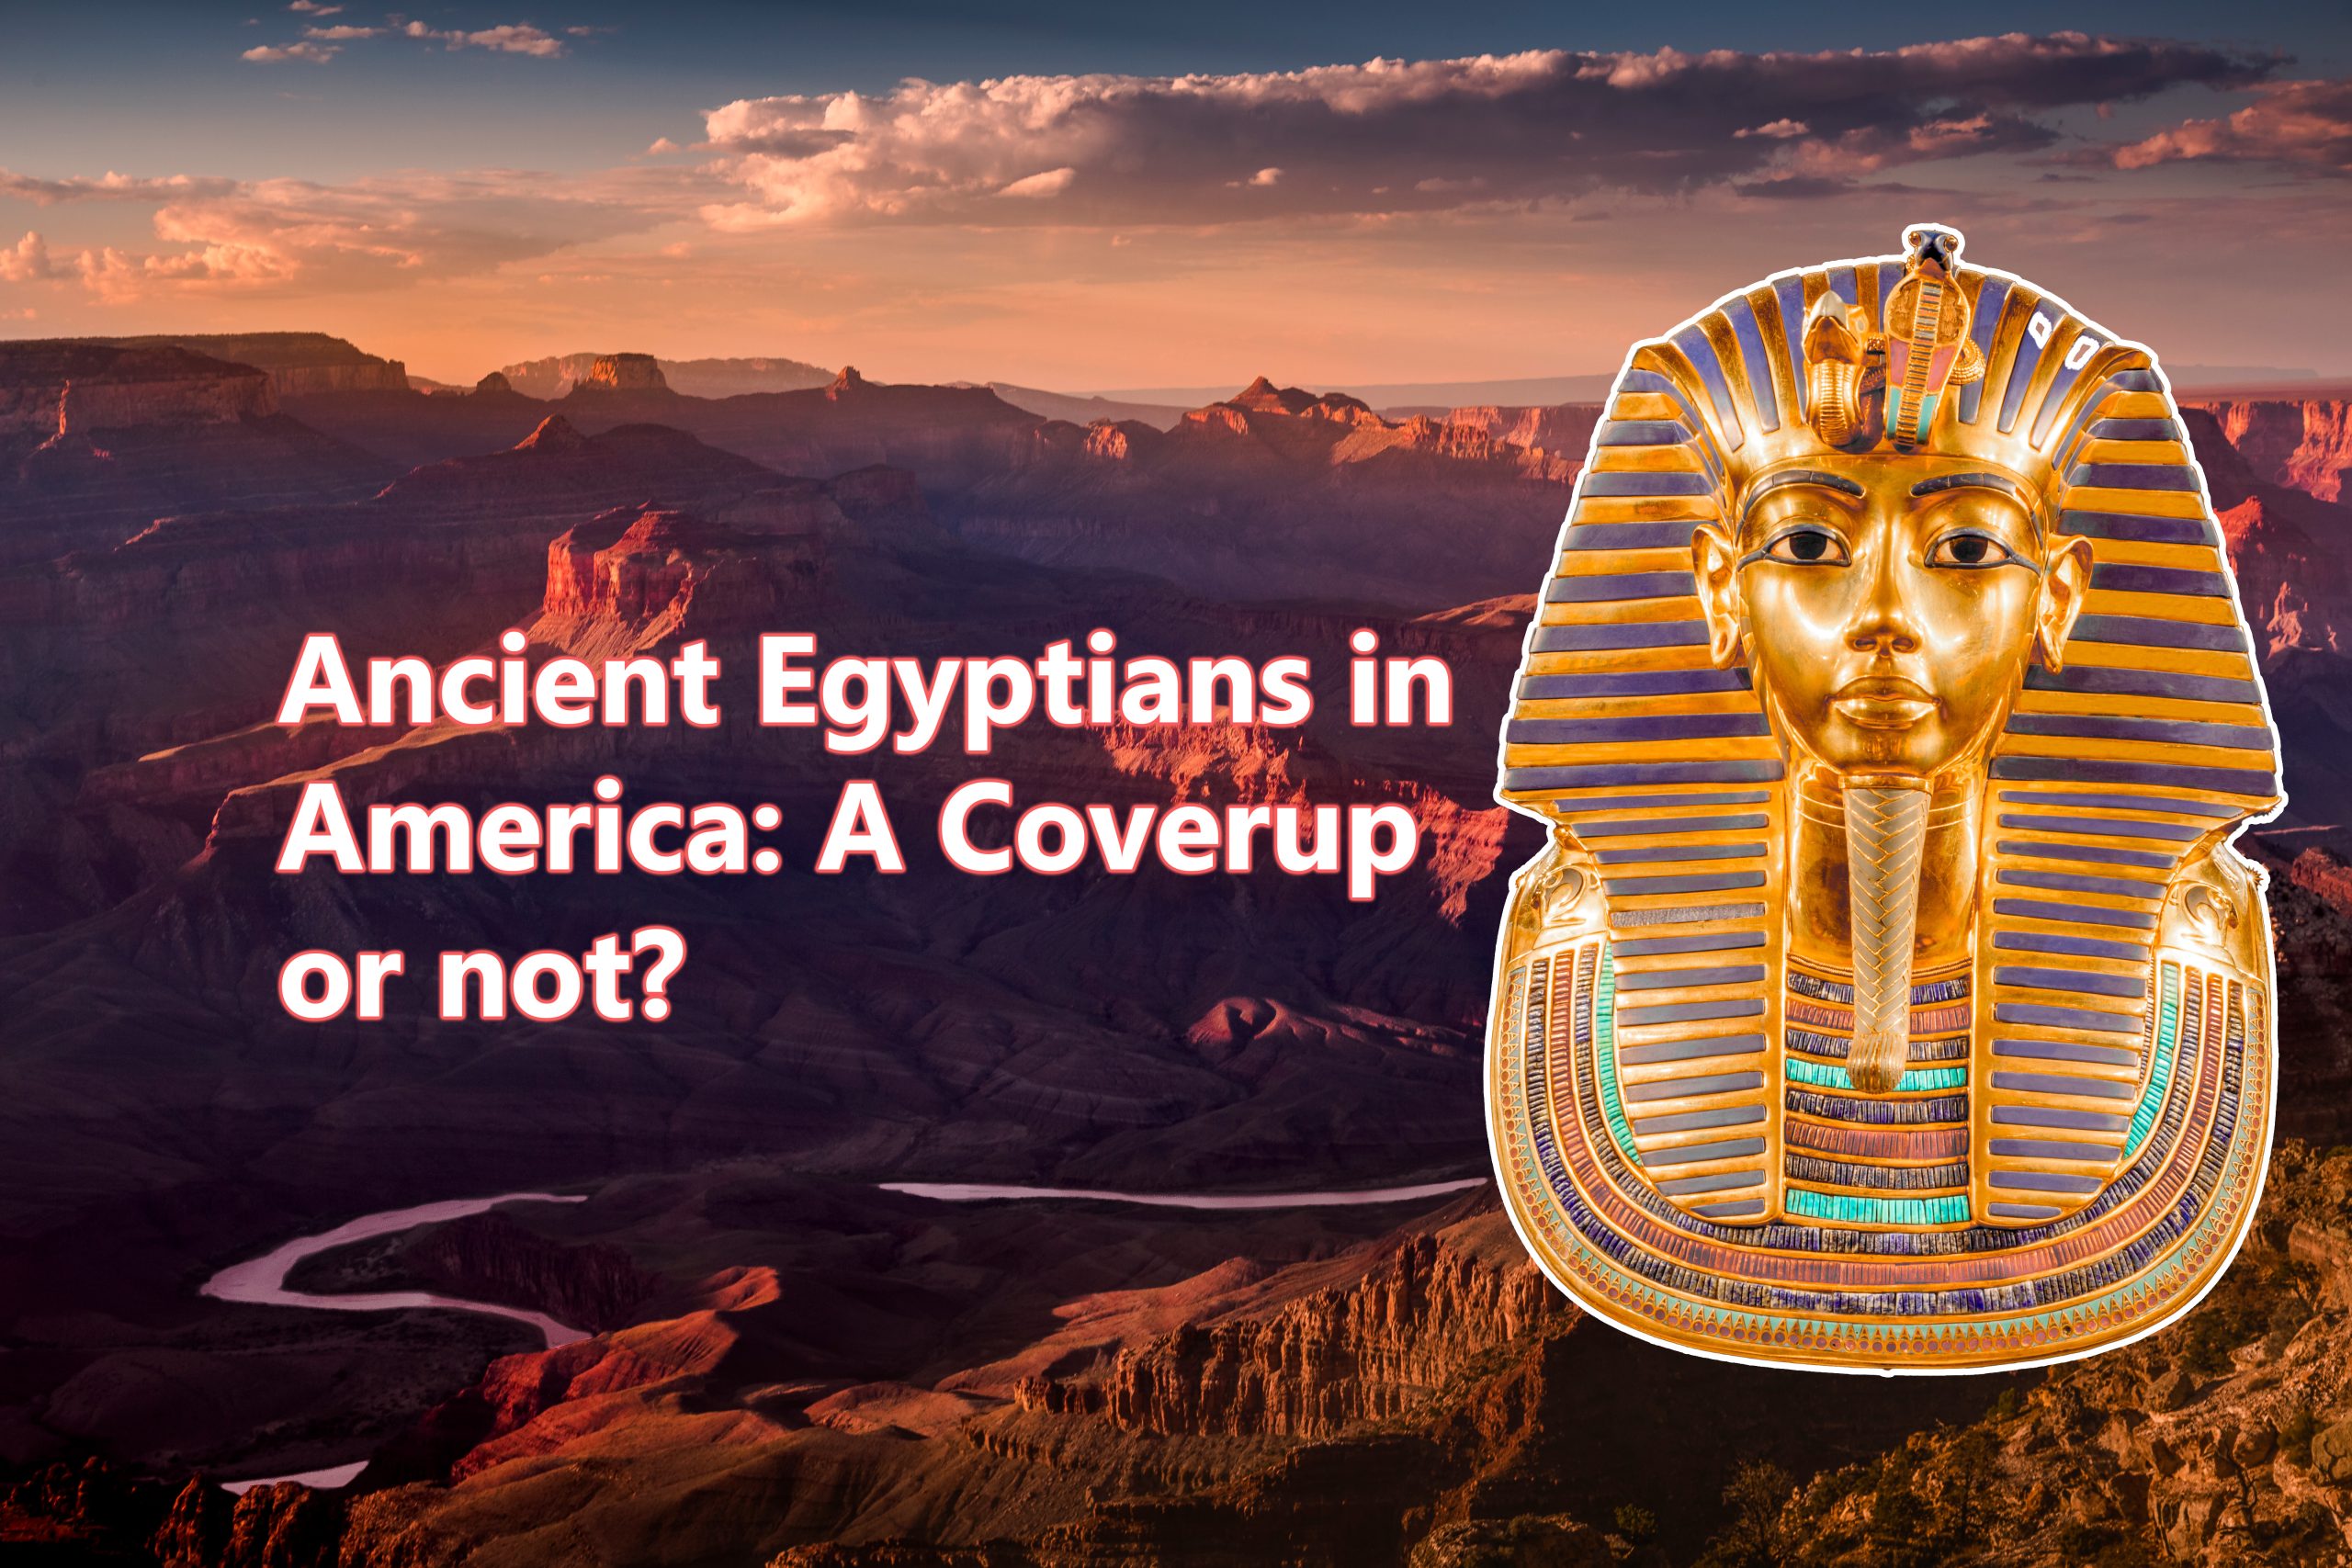 Ancient Egyptians in America: A Coverup or not? Image Credit YAYIMAGES and Curiosmos.